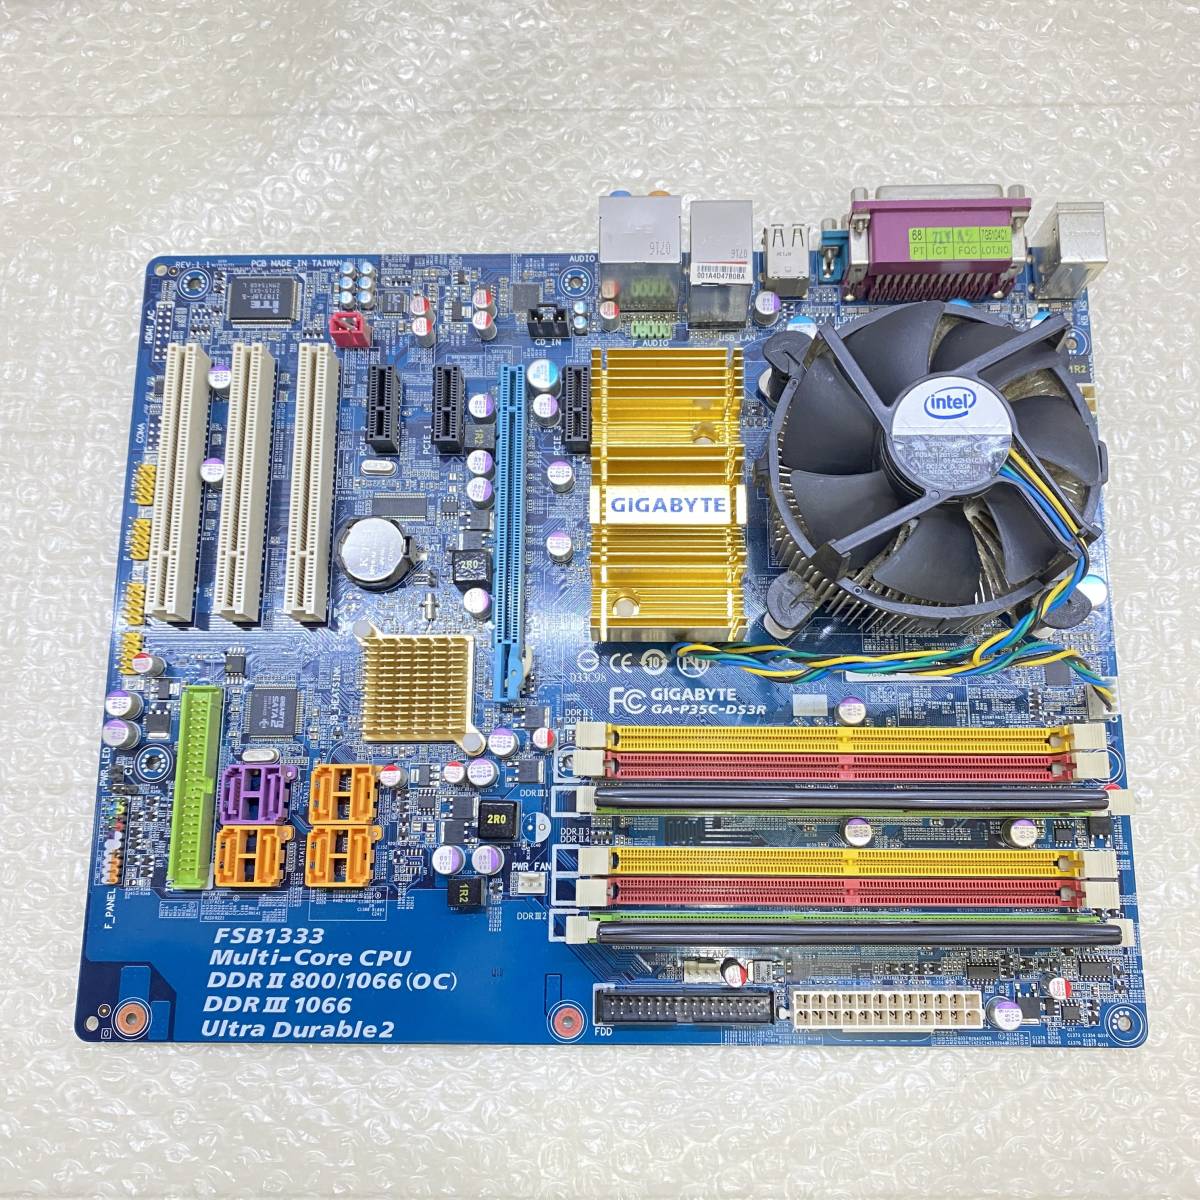 ^ GIGABYTE S-series P35C-DS3R FSB1333 motherboard personal computer peripherals operation not yet verification junk part removing ^ G12547